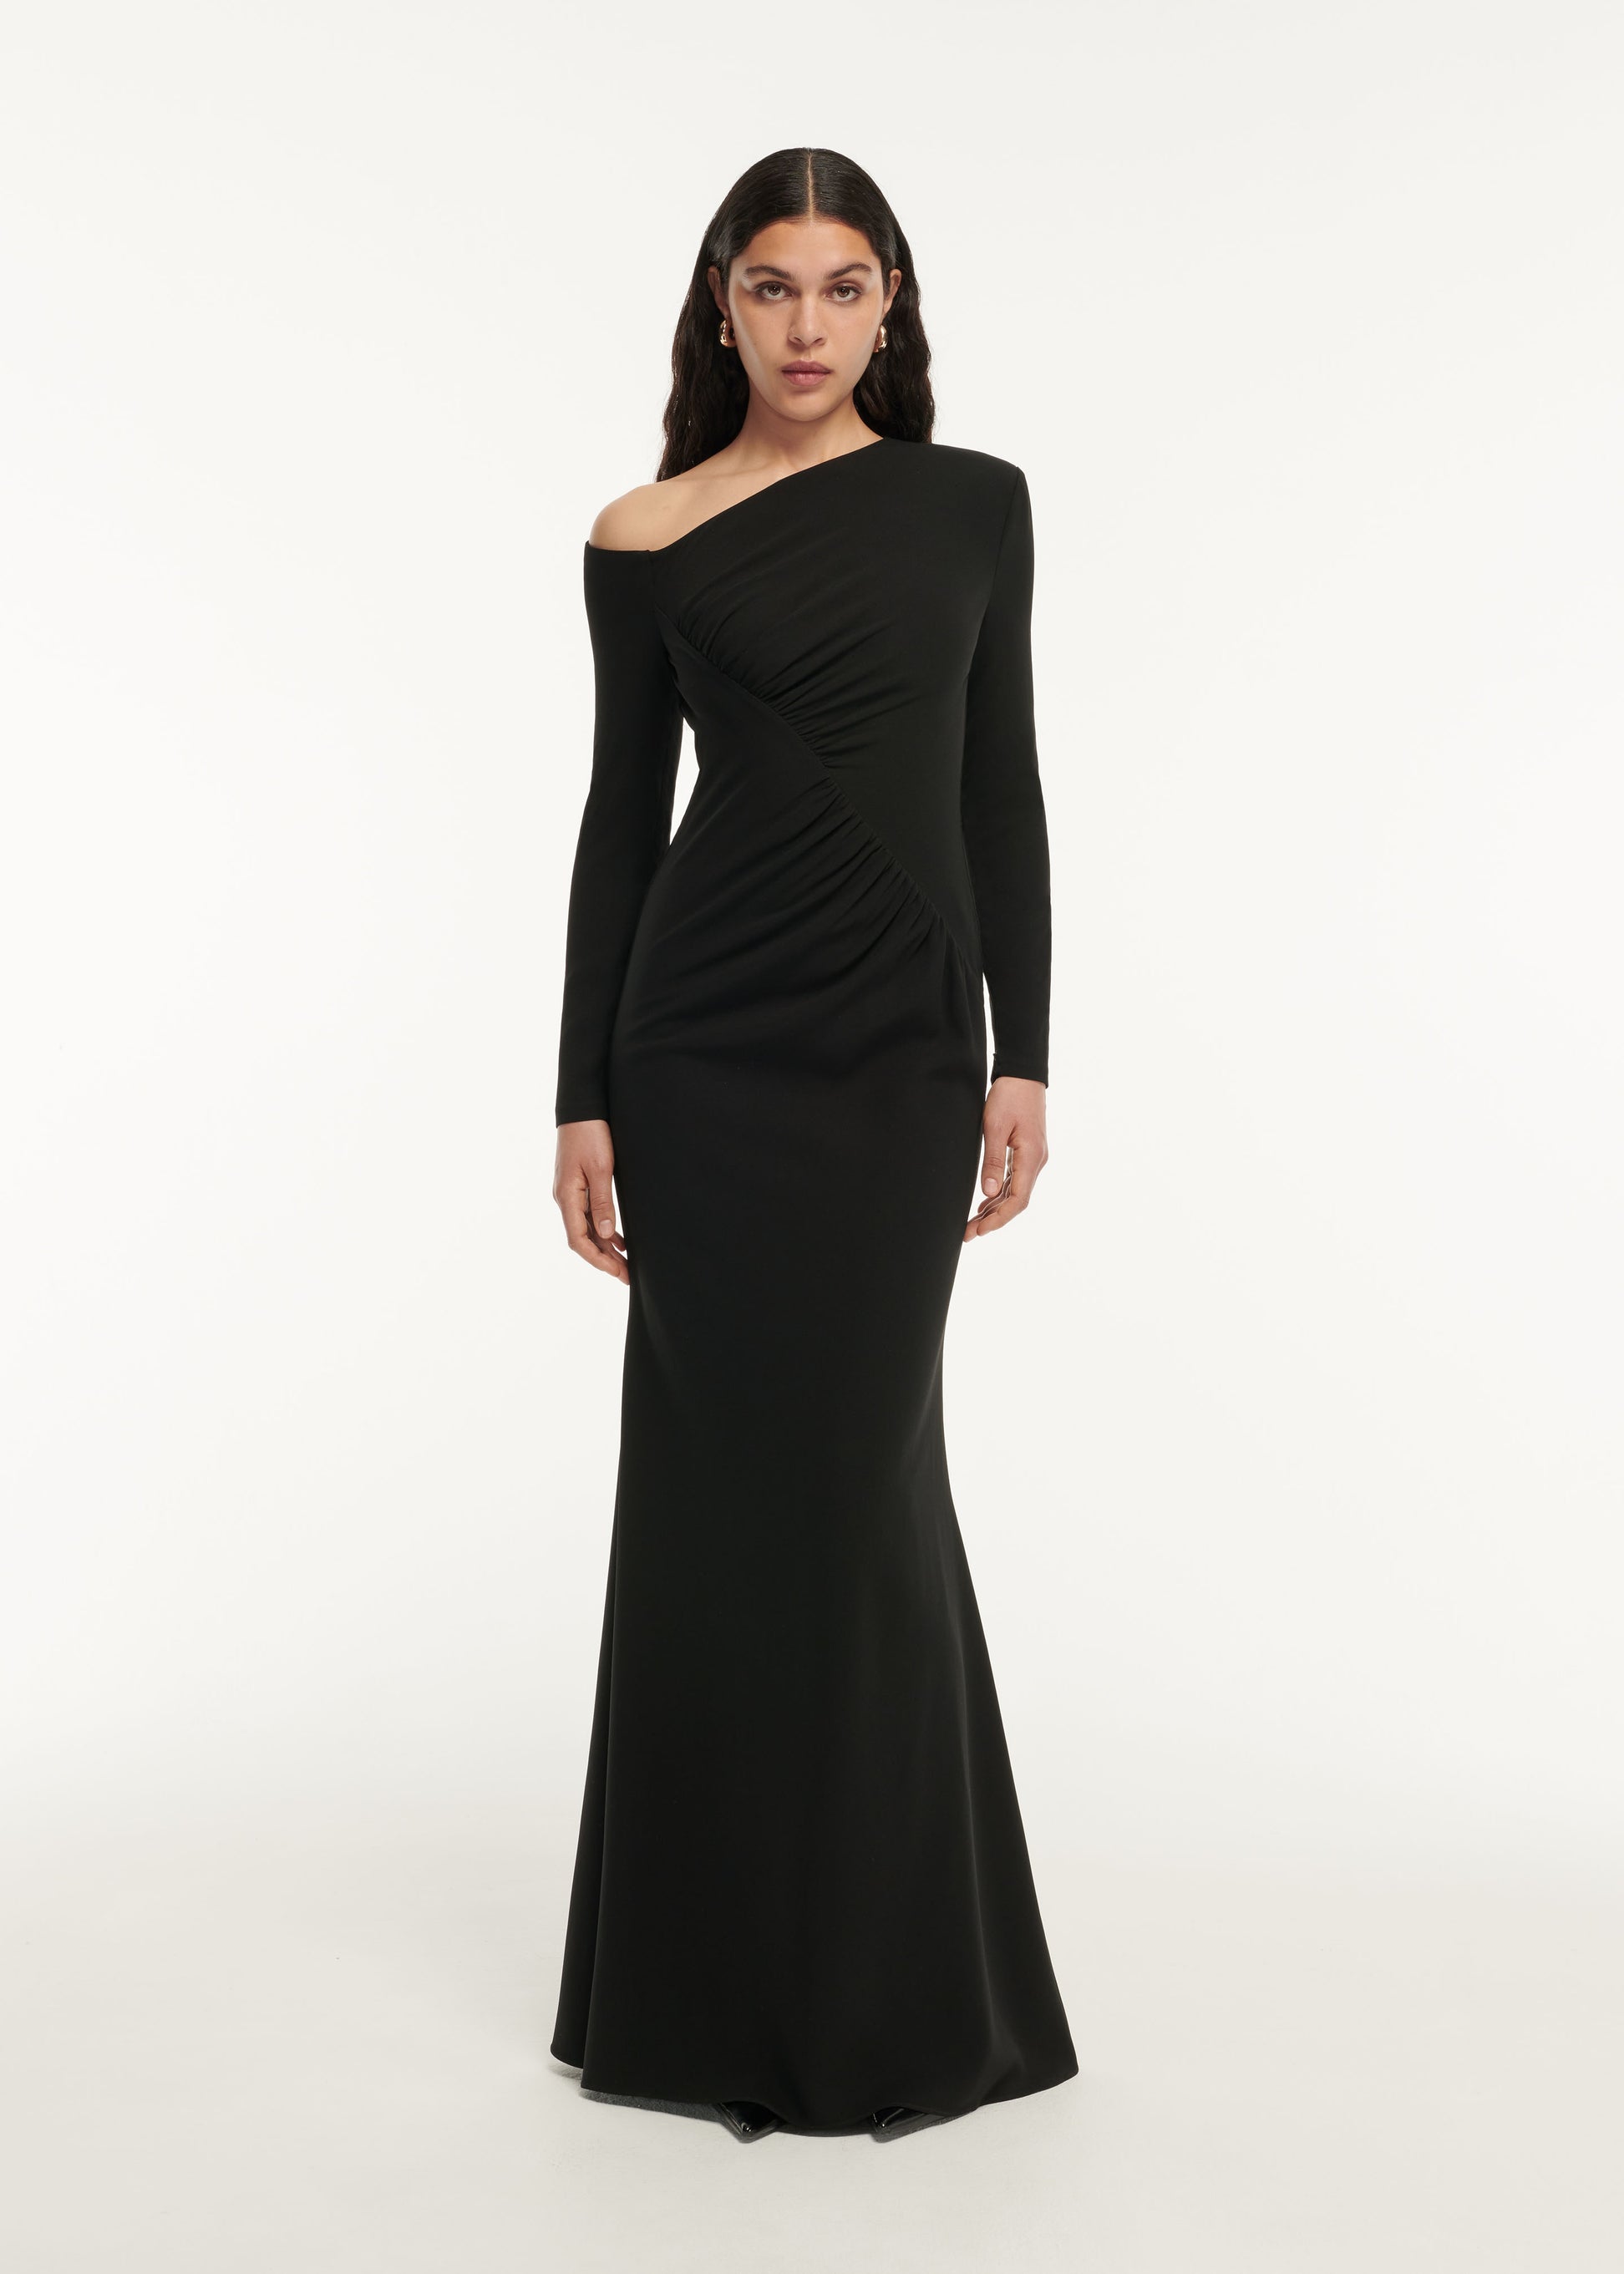 A woman wearing the Long Sleeve Stretch Cady Drape Maxi Dress in Black